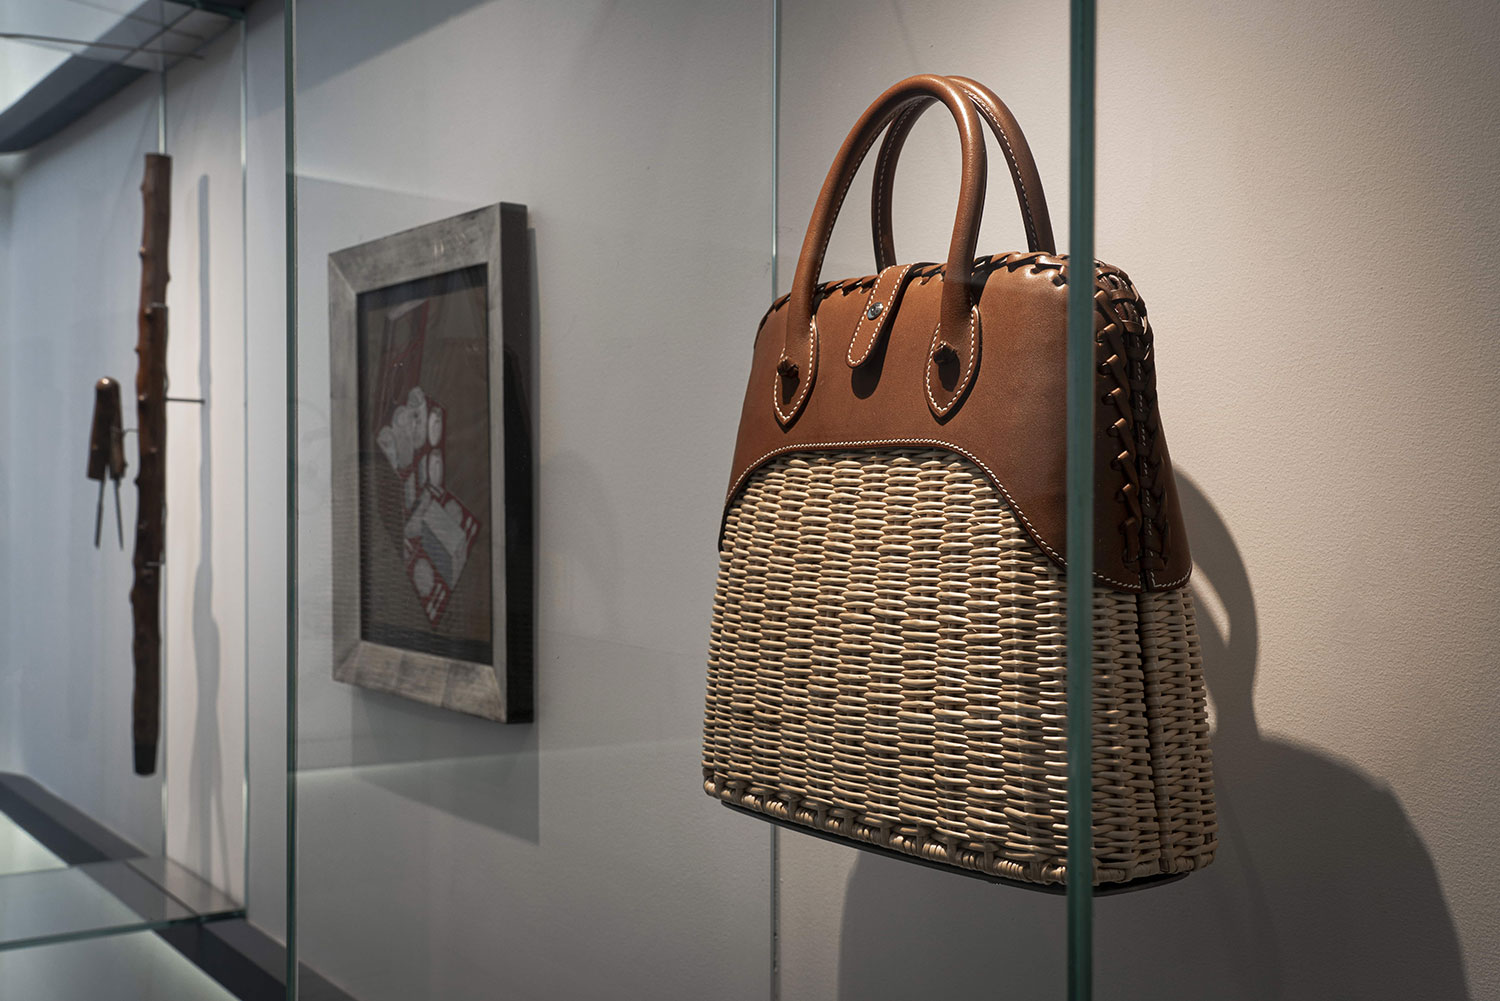 Display featuring the iconic Bolide picnic bag